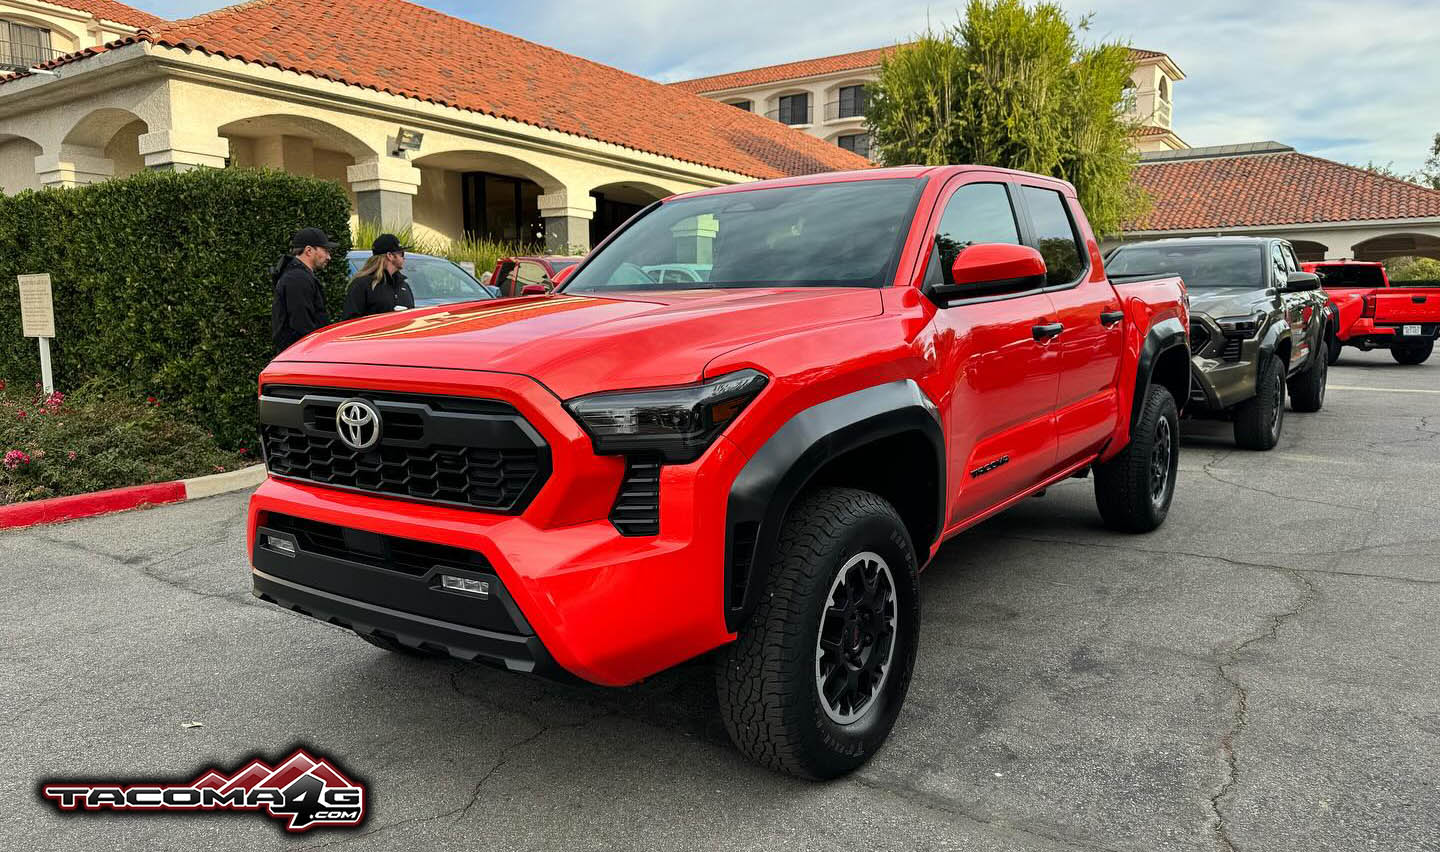 2024 Tacoma All 2024 Tacoma trims (SR, SR5, Limited, PreRunner, Limited, Trailhunter, TRD Sport/Offroad/Pro) in many colors @ media drive Solar Octane 2024 Tacoma TRD Offroad 